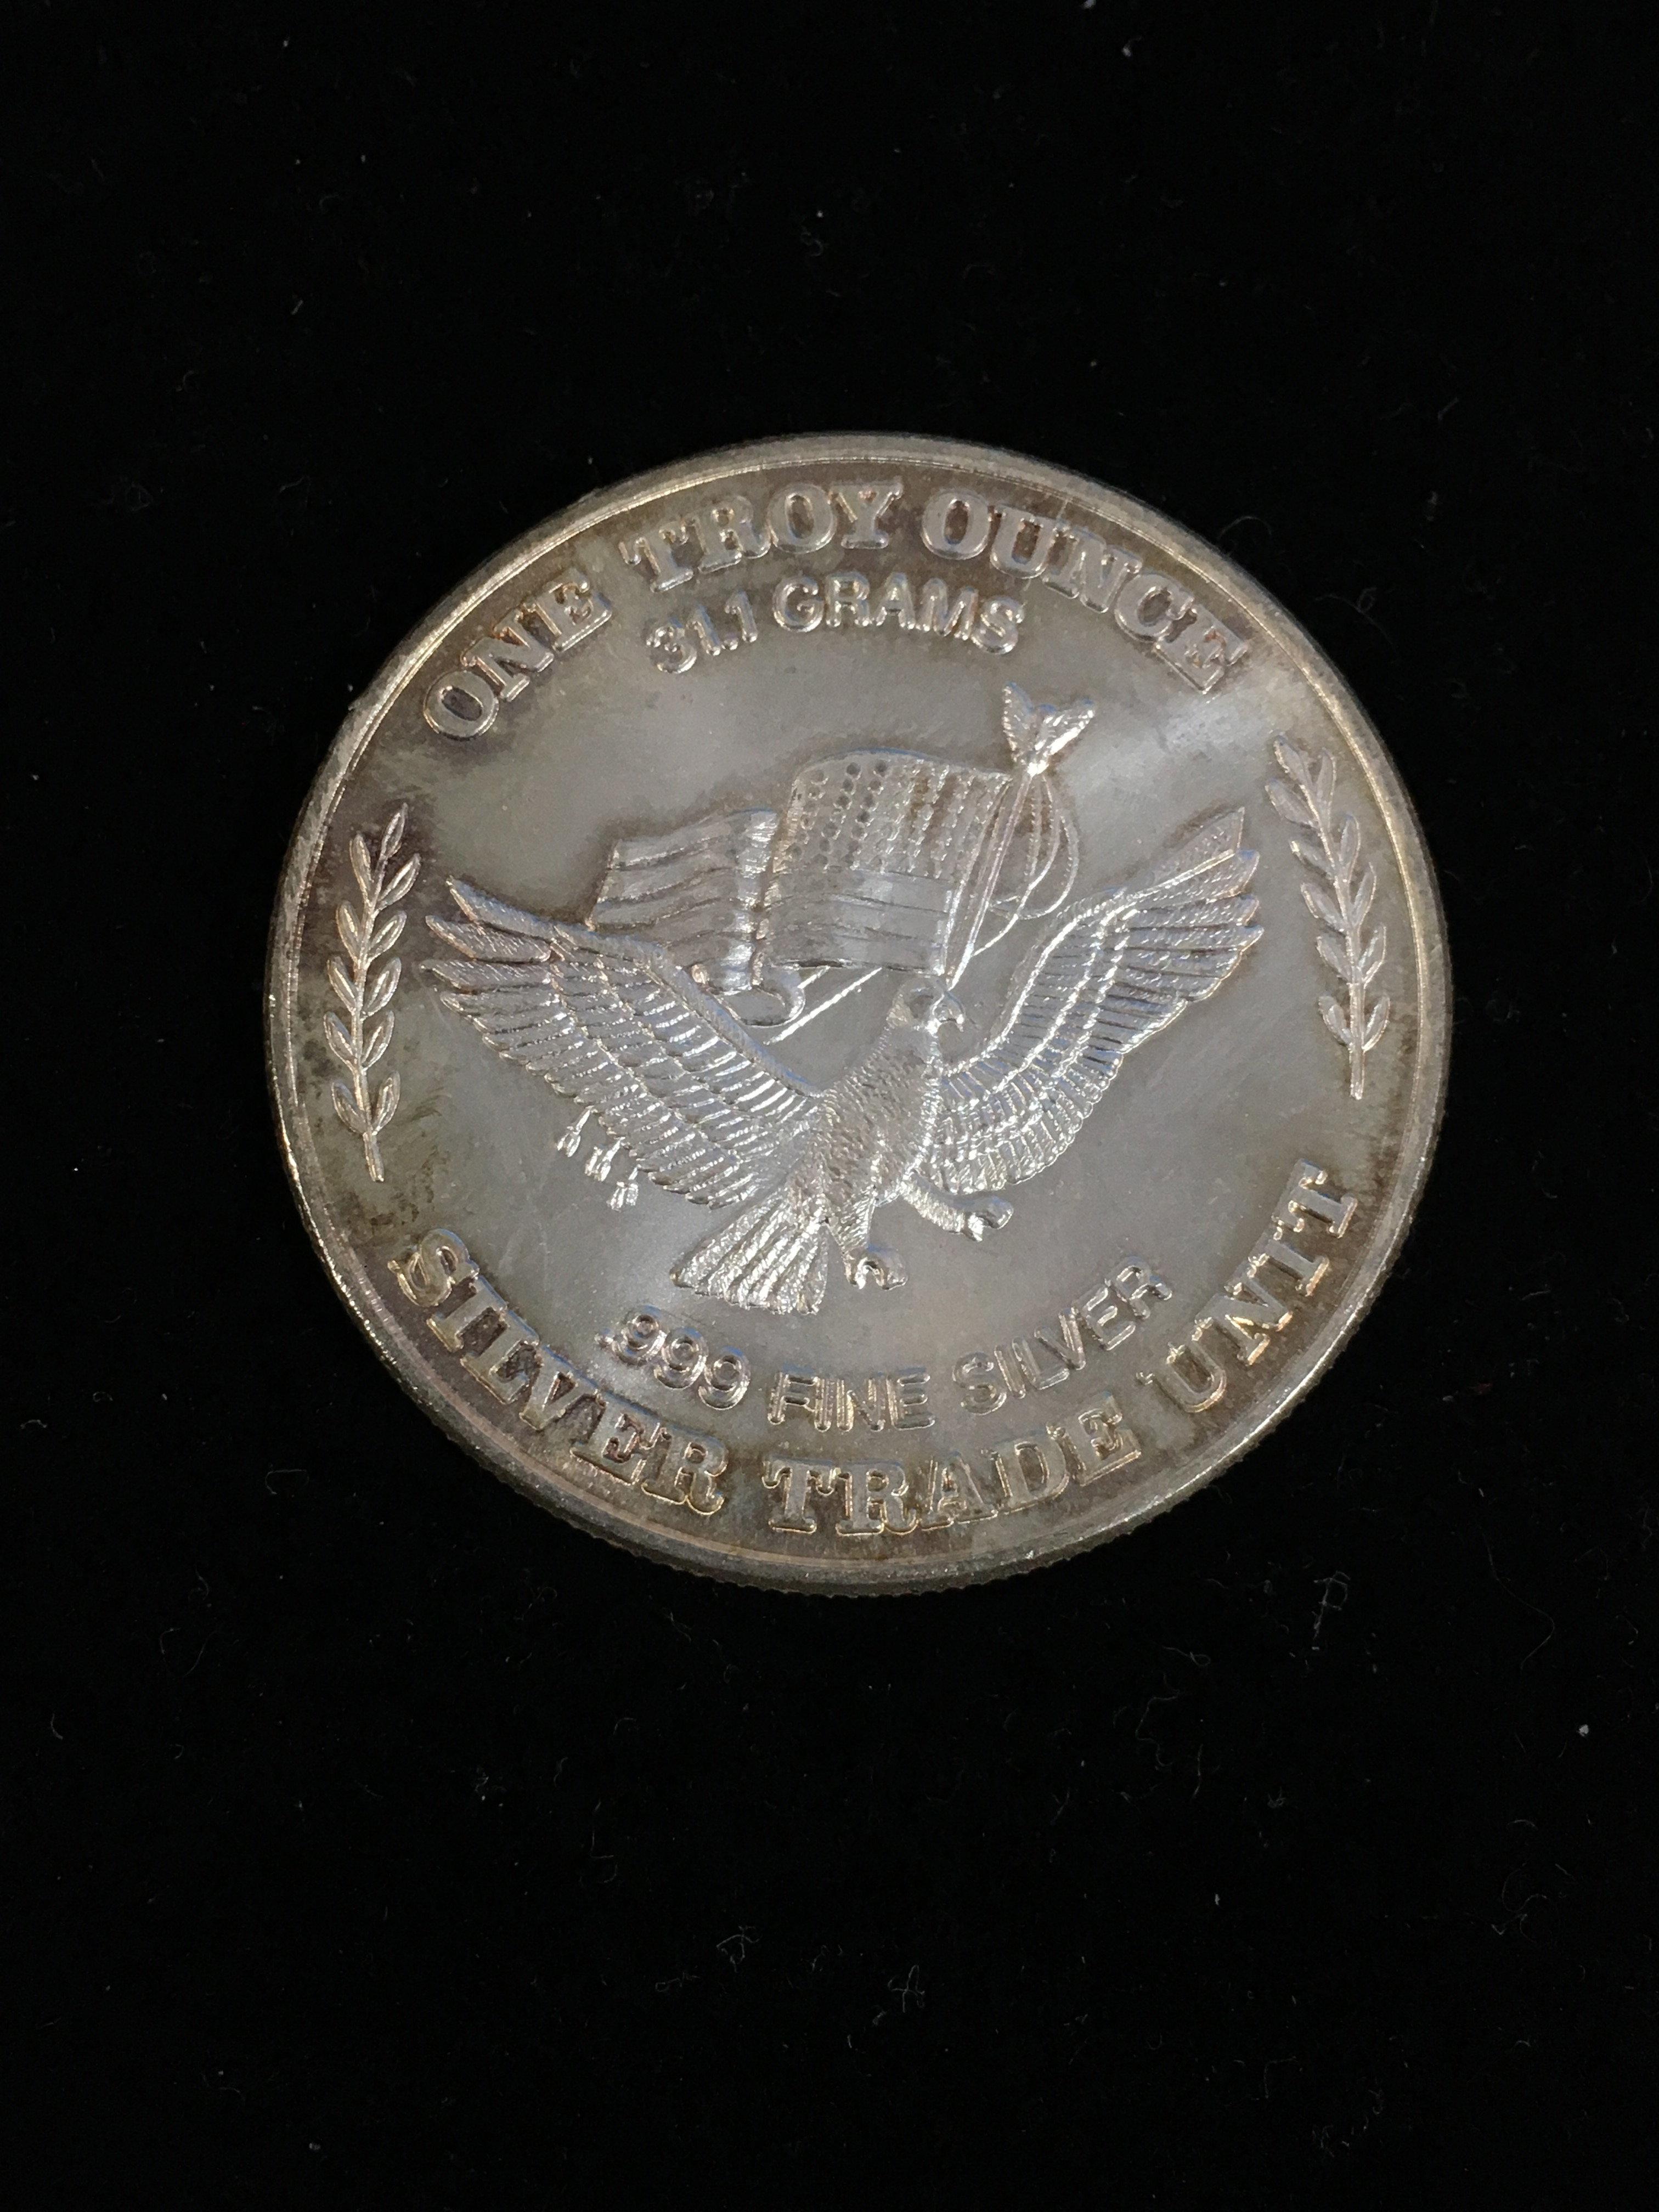 1 Troy Ounce .999 Fine Silver US Assay Office 1981 Minted from Reserve Silver Bullion Round Coin